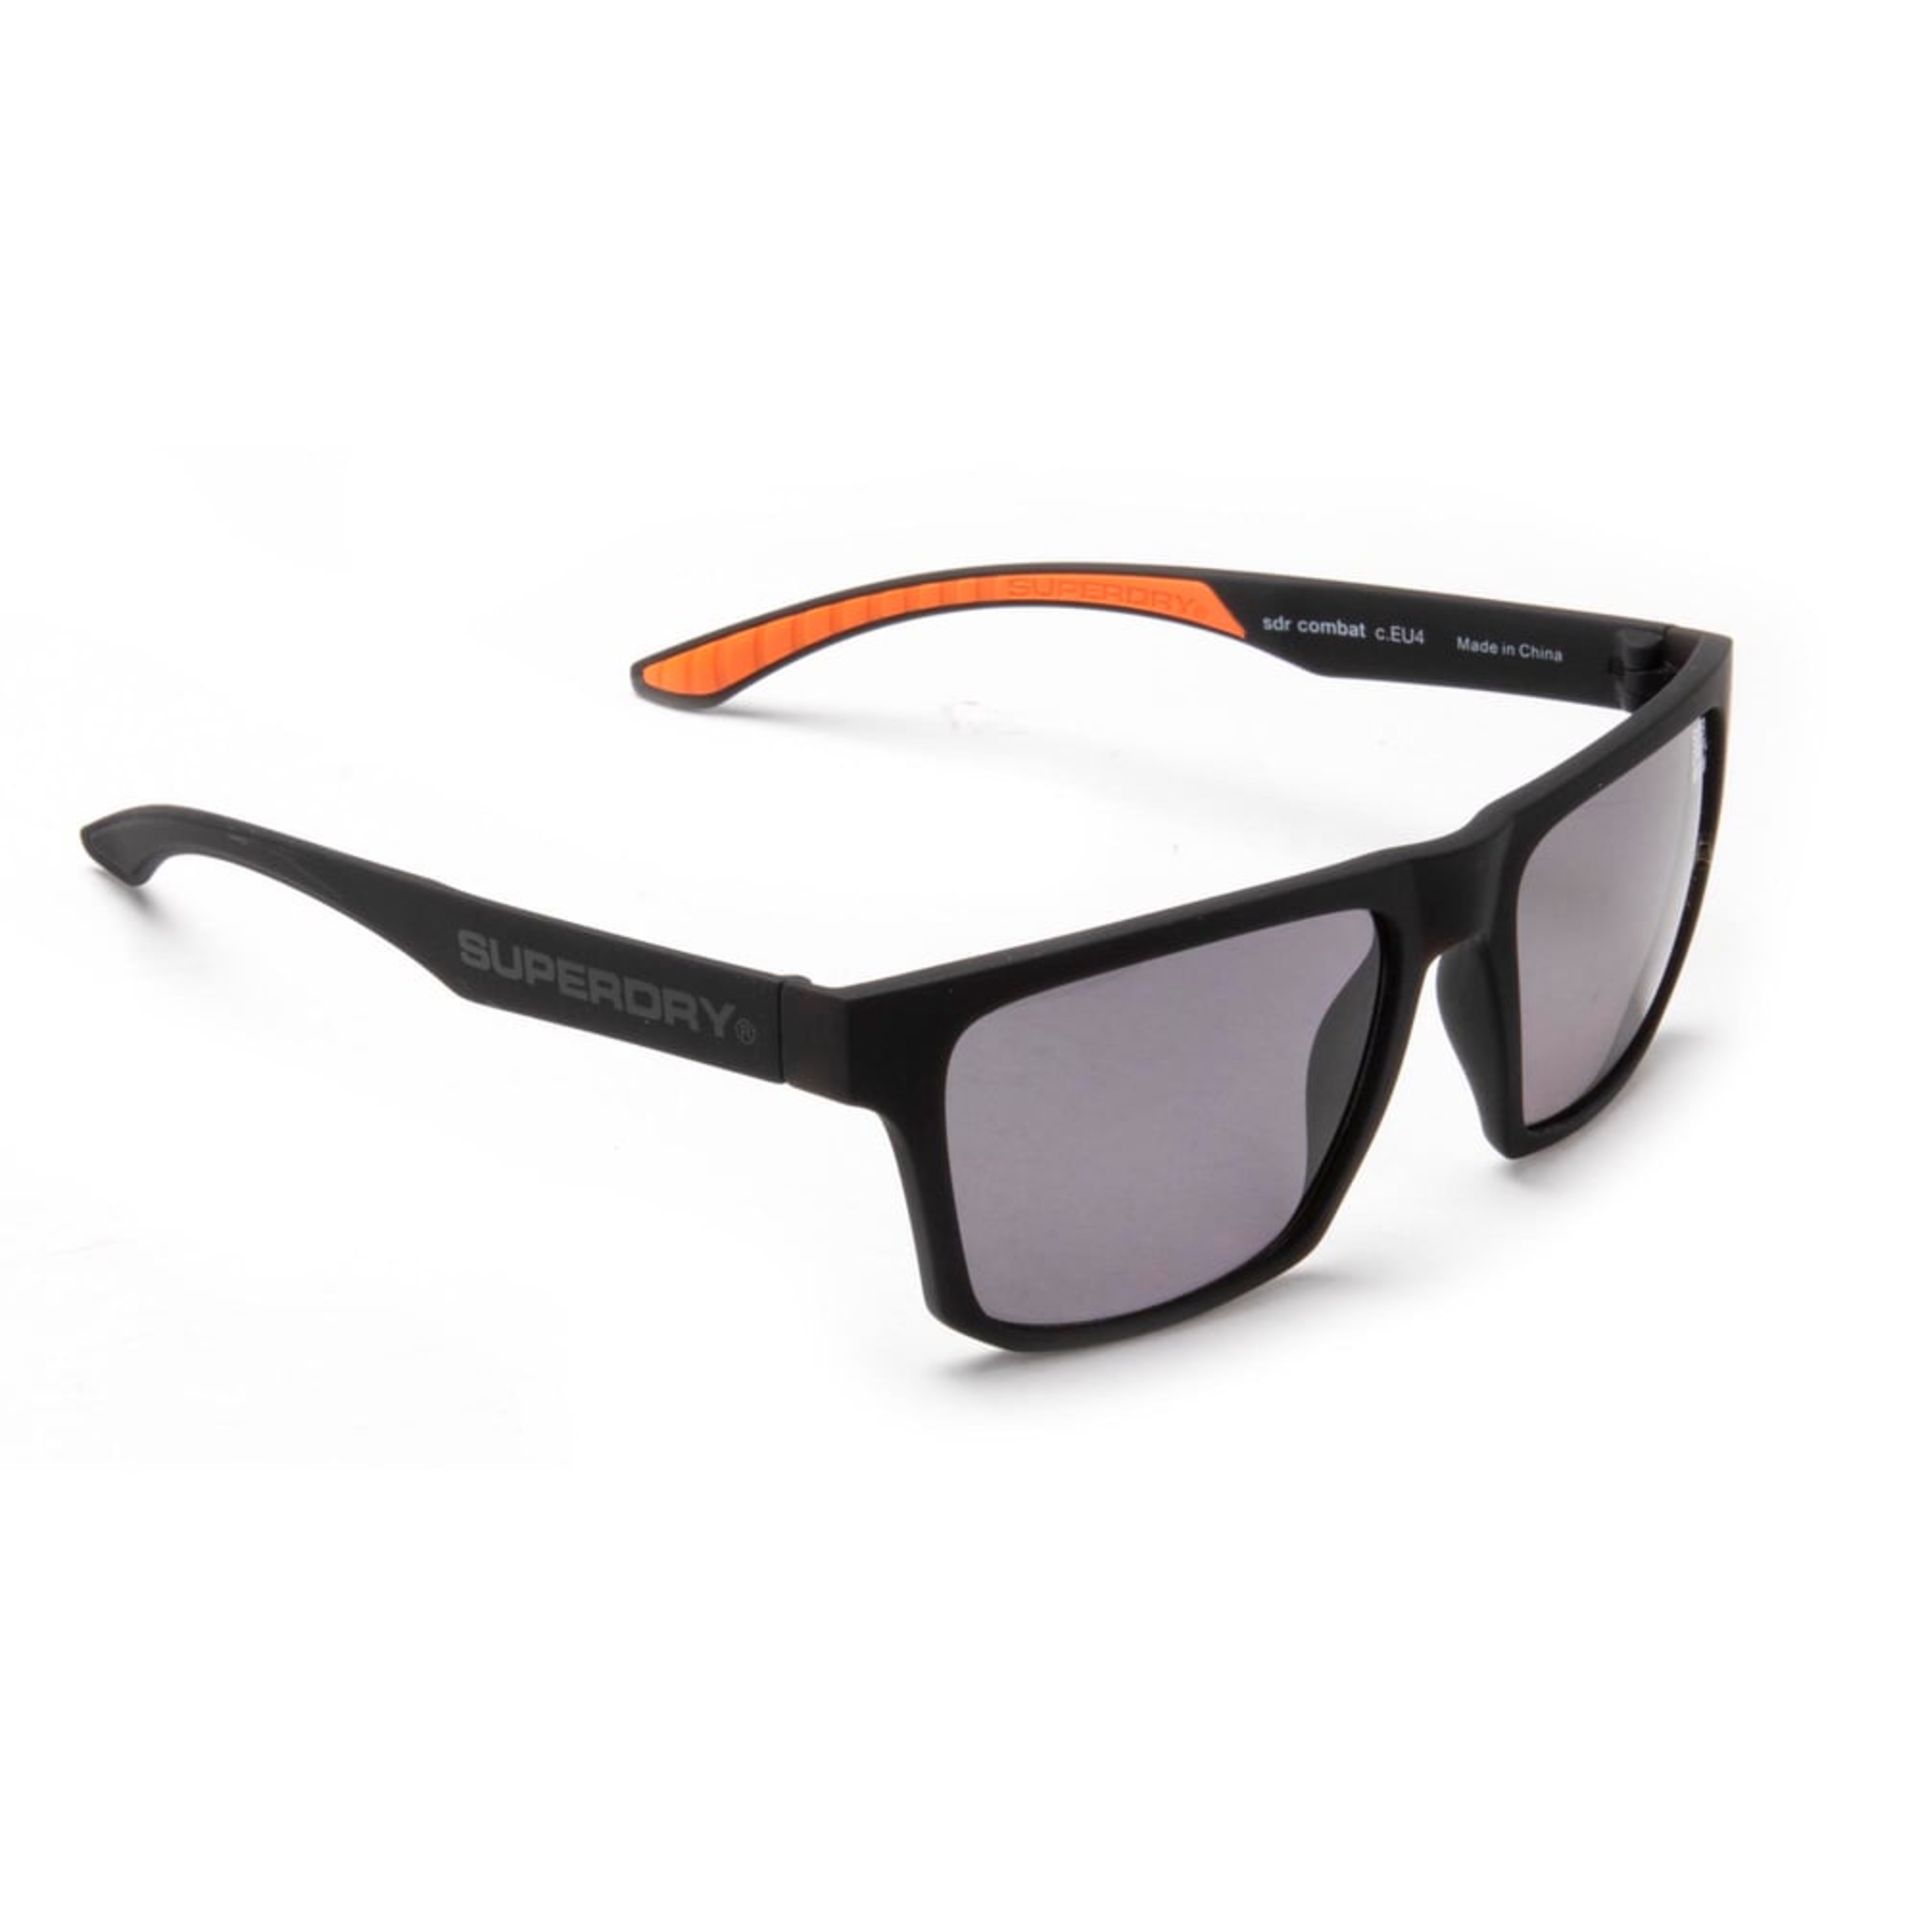 Superdry Combat Sunglasses with Pouch and Box